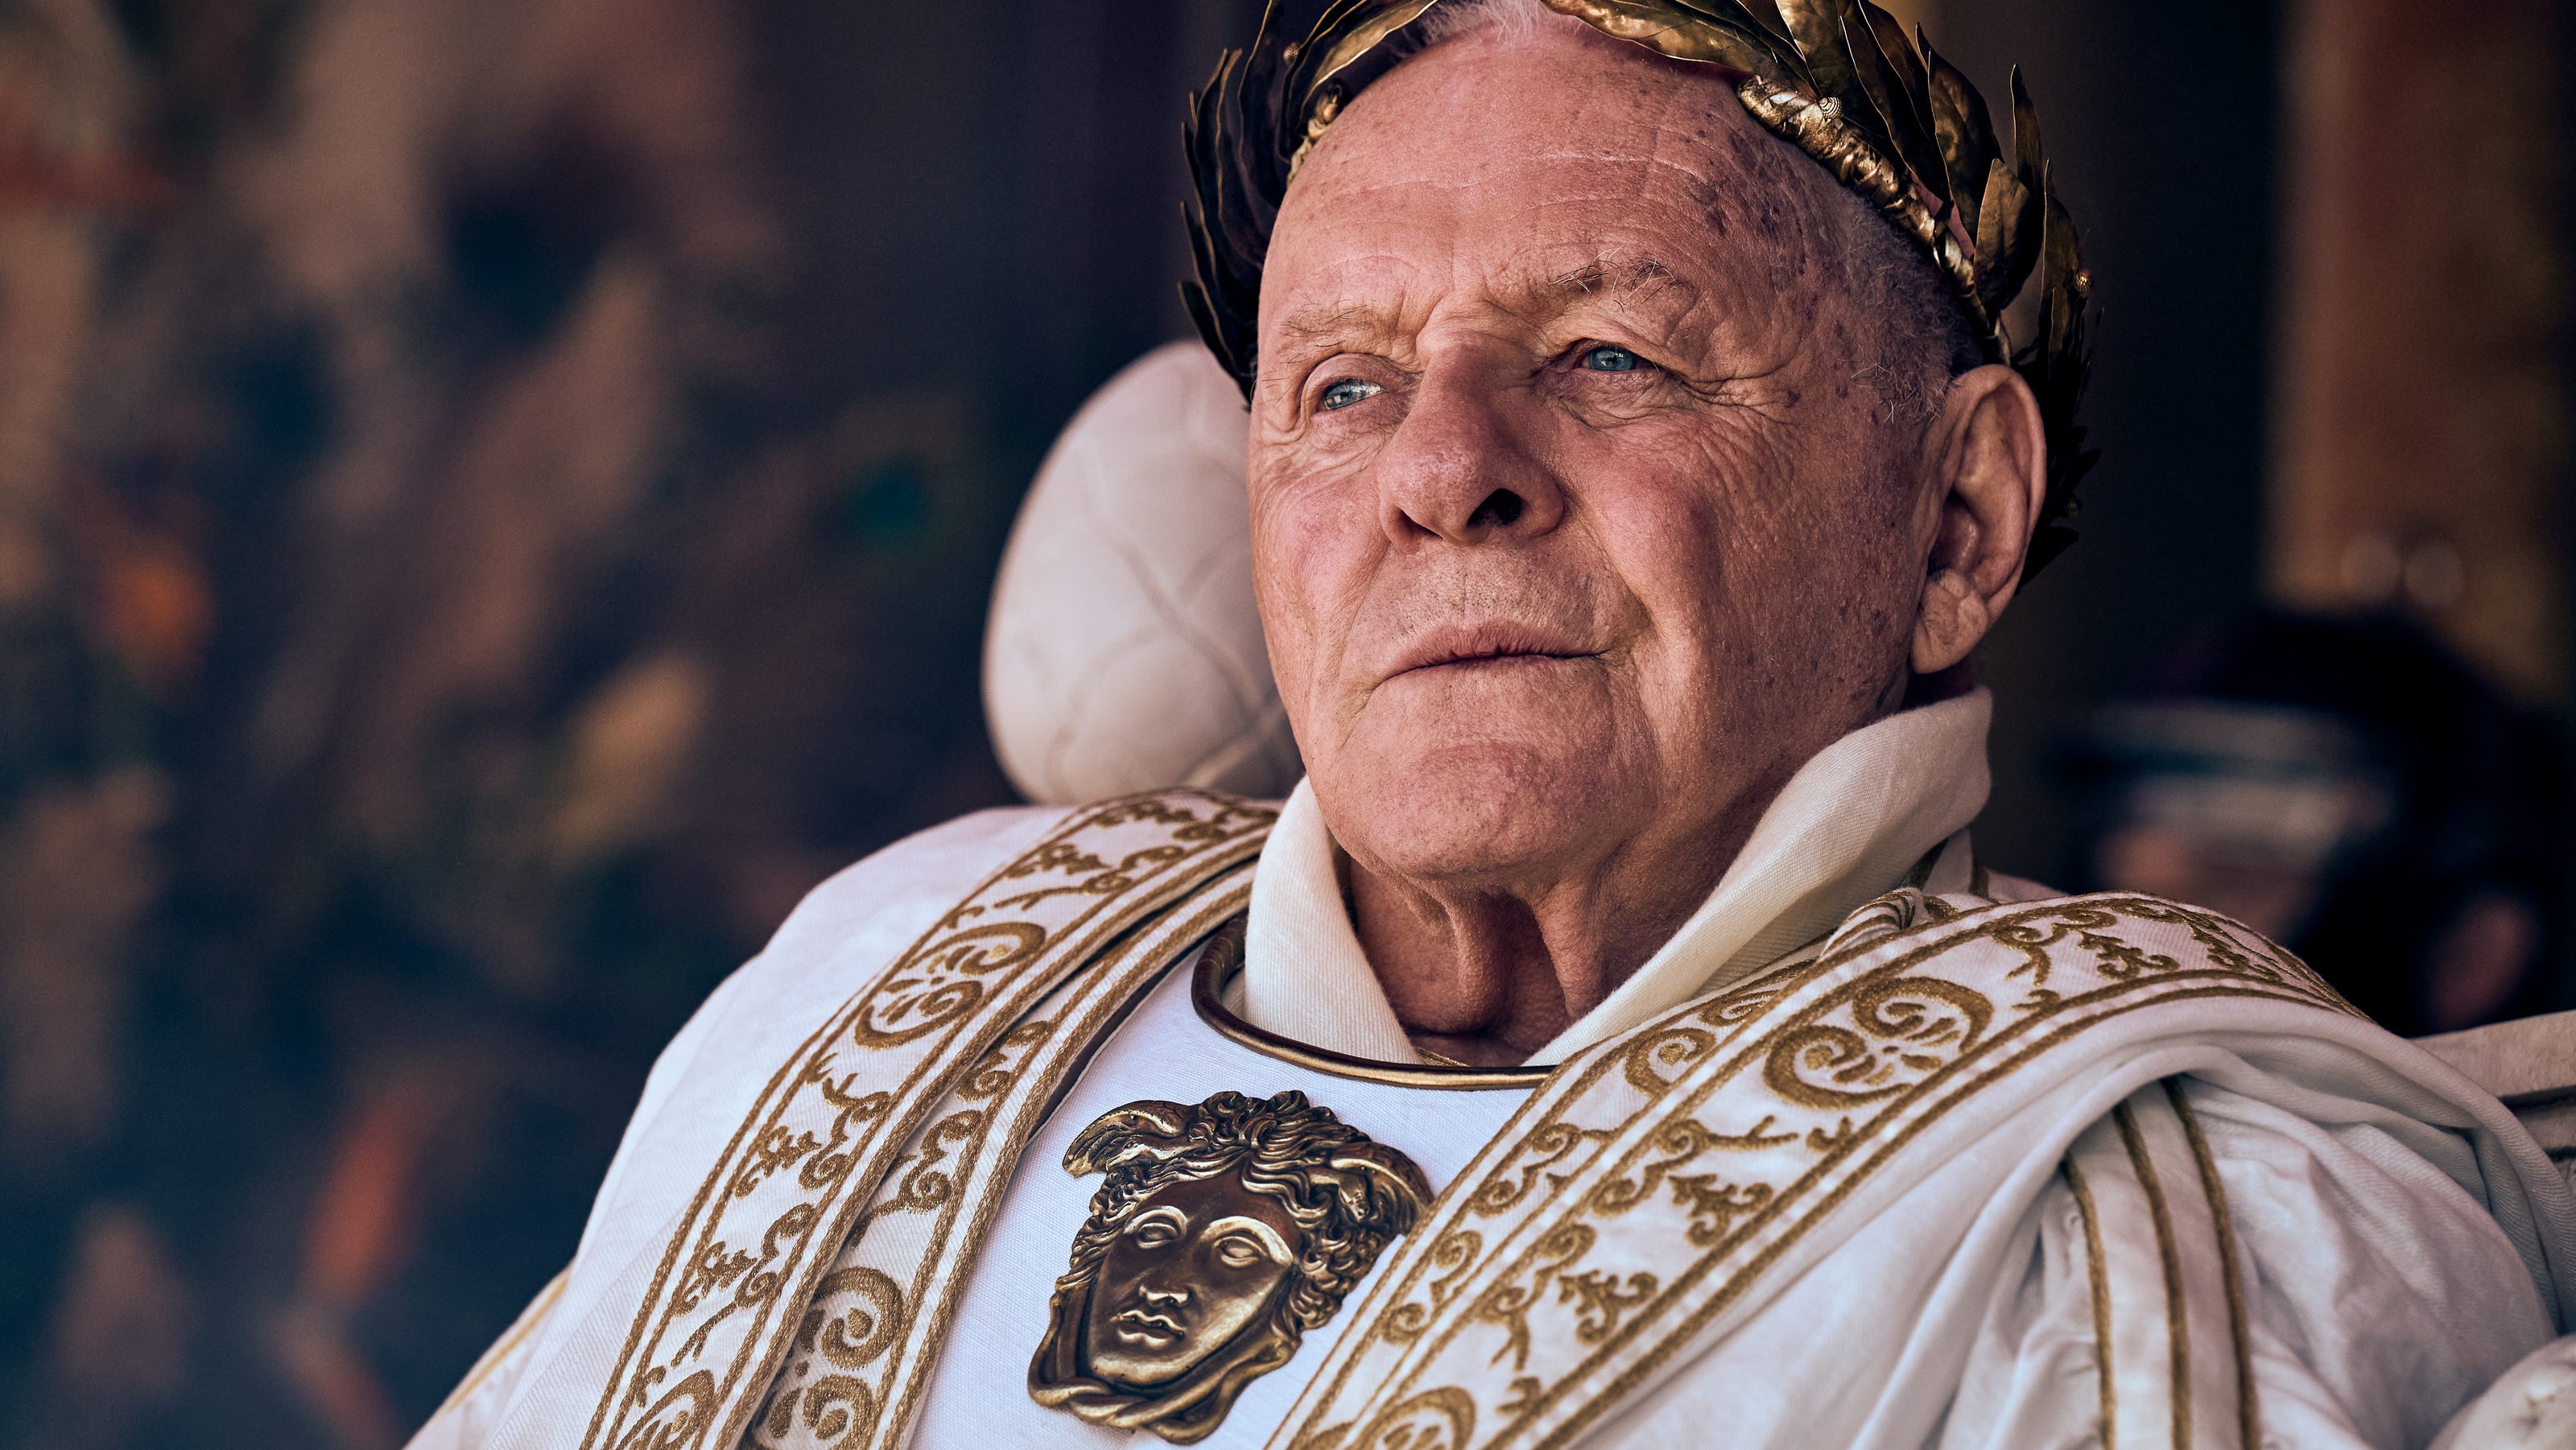 Anthony Hopkins makes Roman emperor decree on 'Those About to Die' first day: 'Silence!'